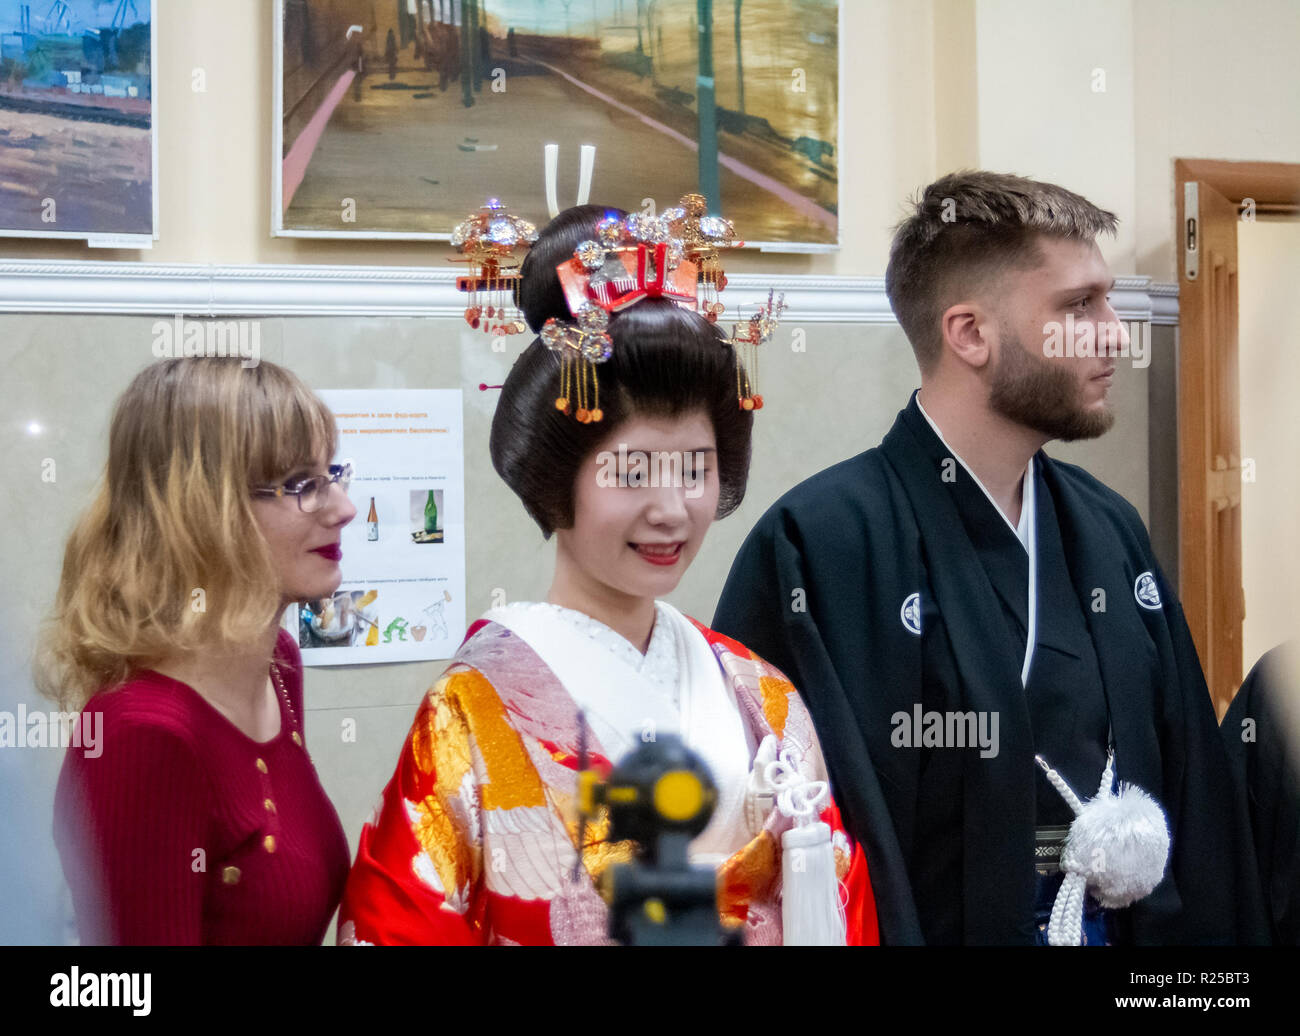 Vladivostok, Russia. November 17, 2018. A Japanese girl actress in a national bride costume is photographed with visitors during the Fourth Festival of Japanese Culture in the Far Eastern city of Primorsky Krai, Russia, Vladivostok. Credit: Aleksei Nikolaev / Alamy Live News Stock Photo